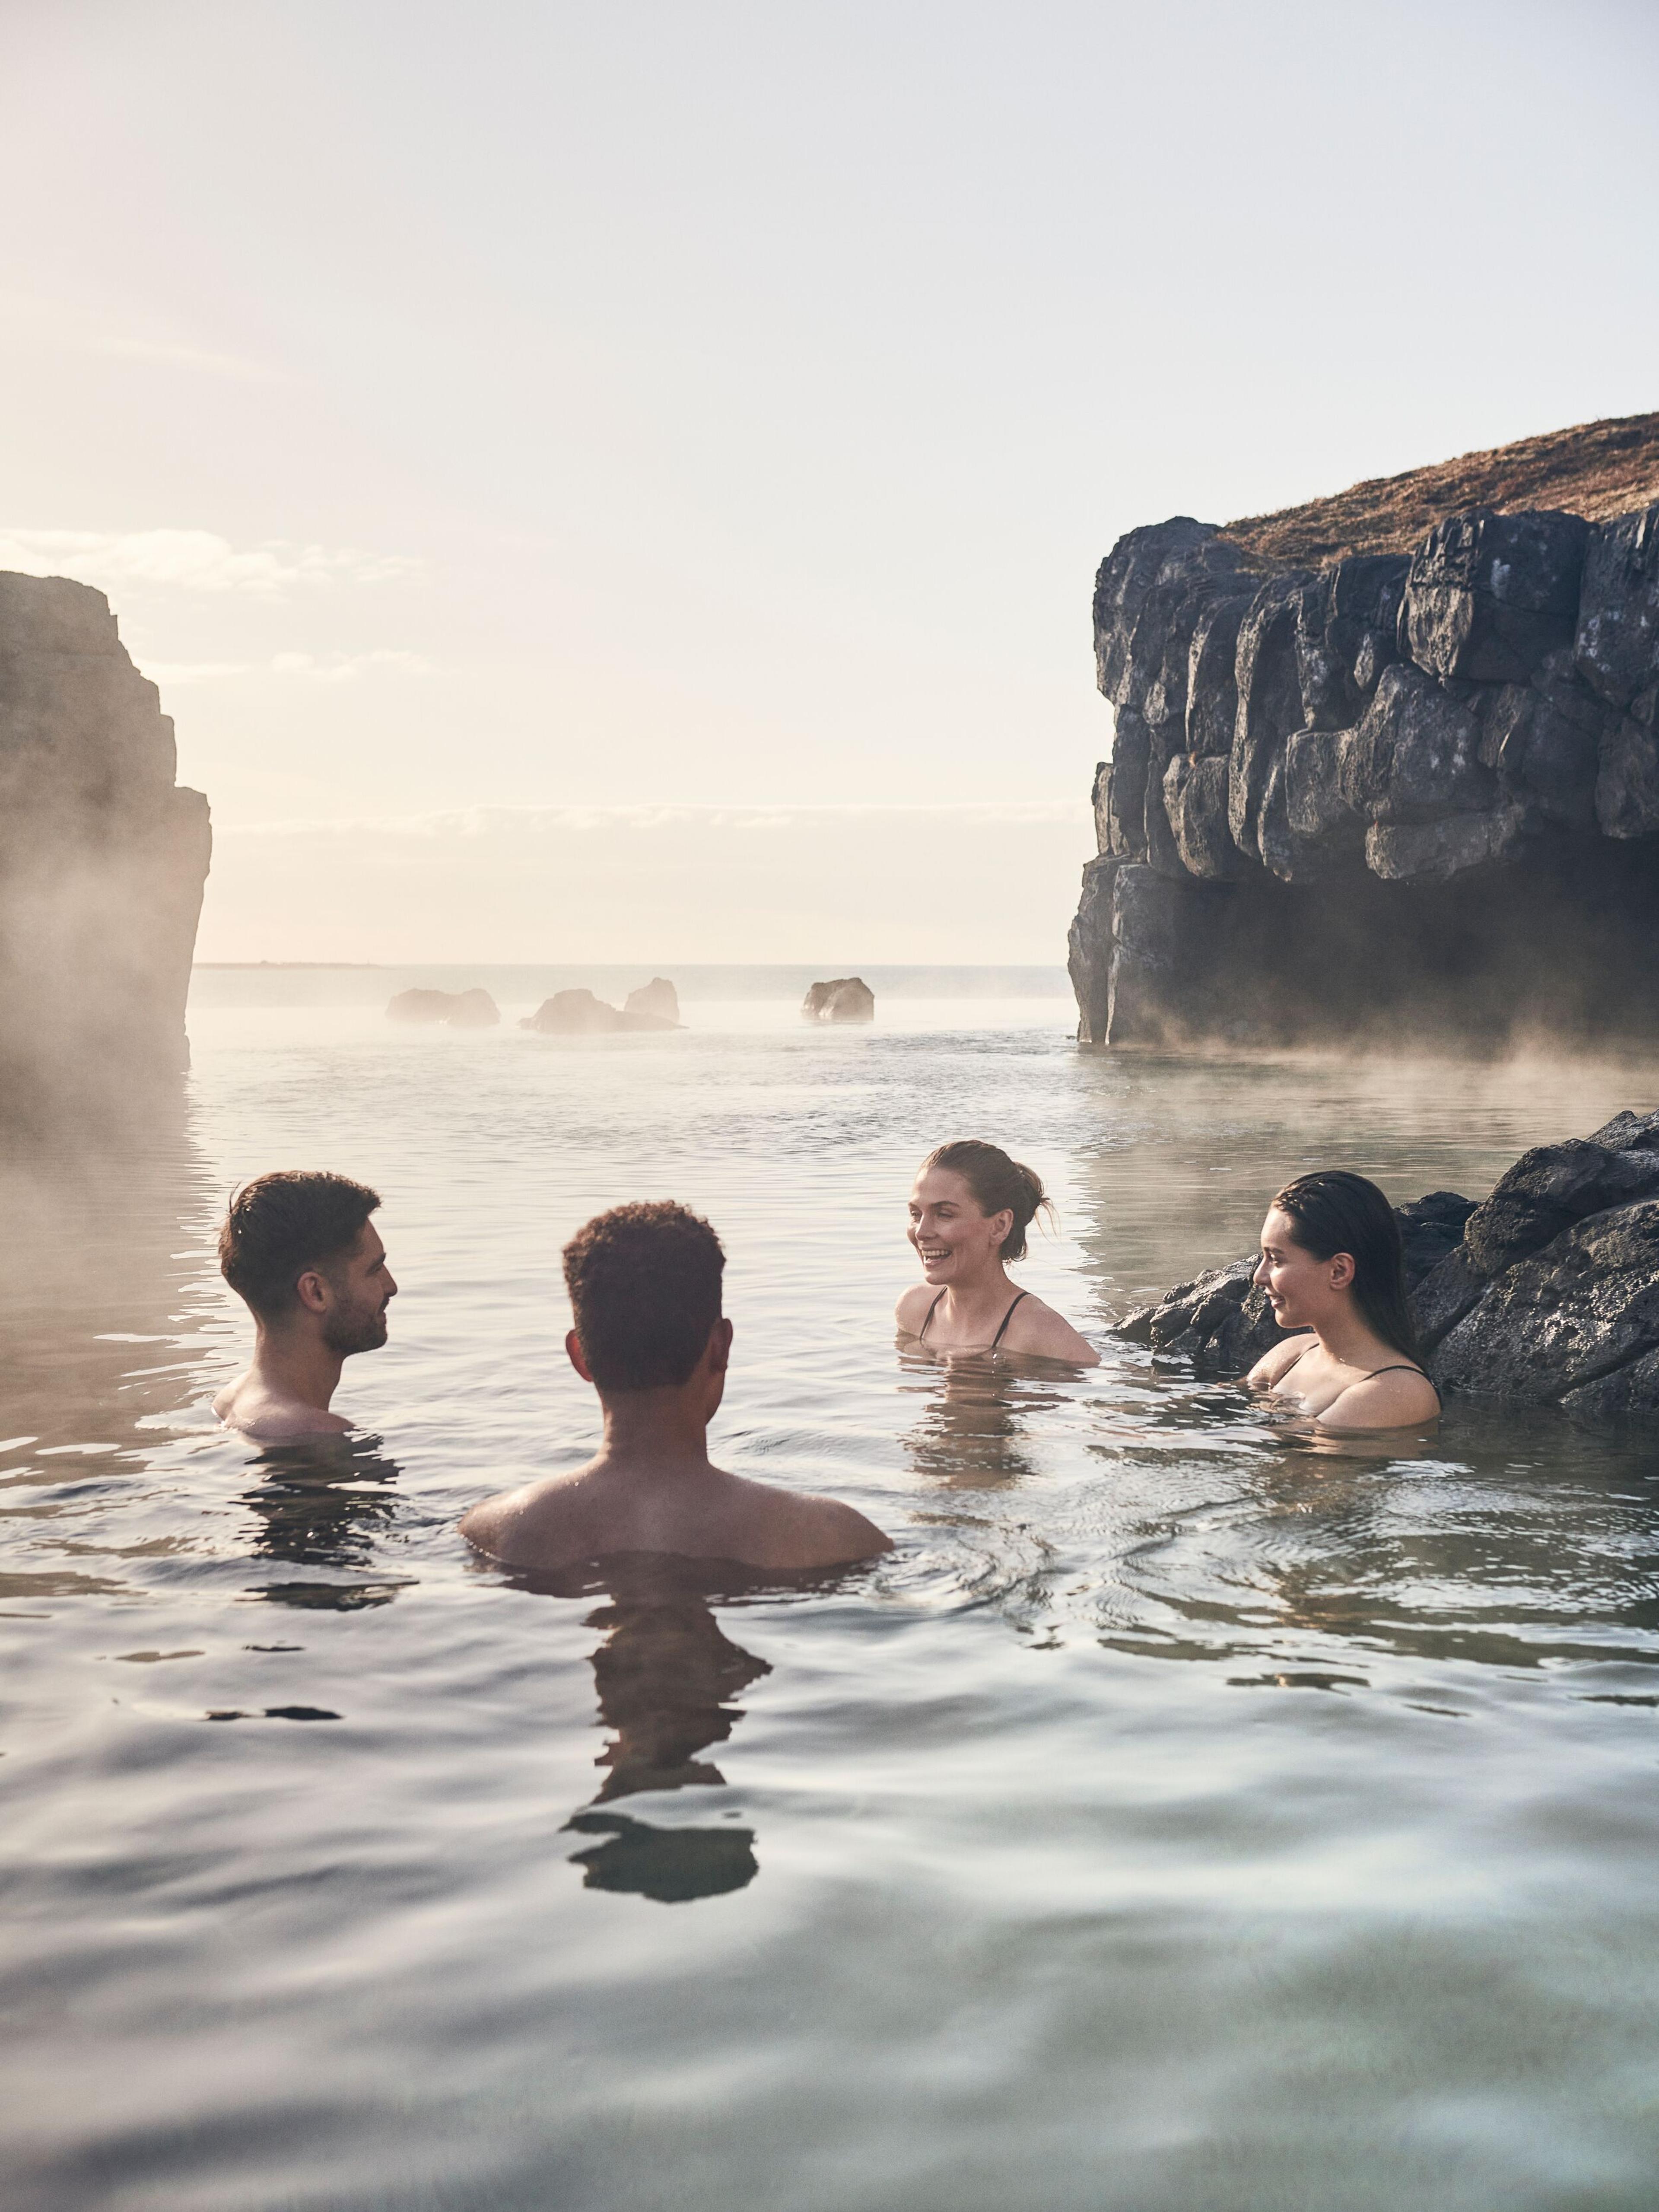 A group of friends enjoy a warm, convivial soak in the geothermal waters surrounded by the natural rocky landscape softened by the hazy mist of the hot spring.